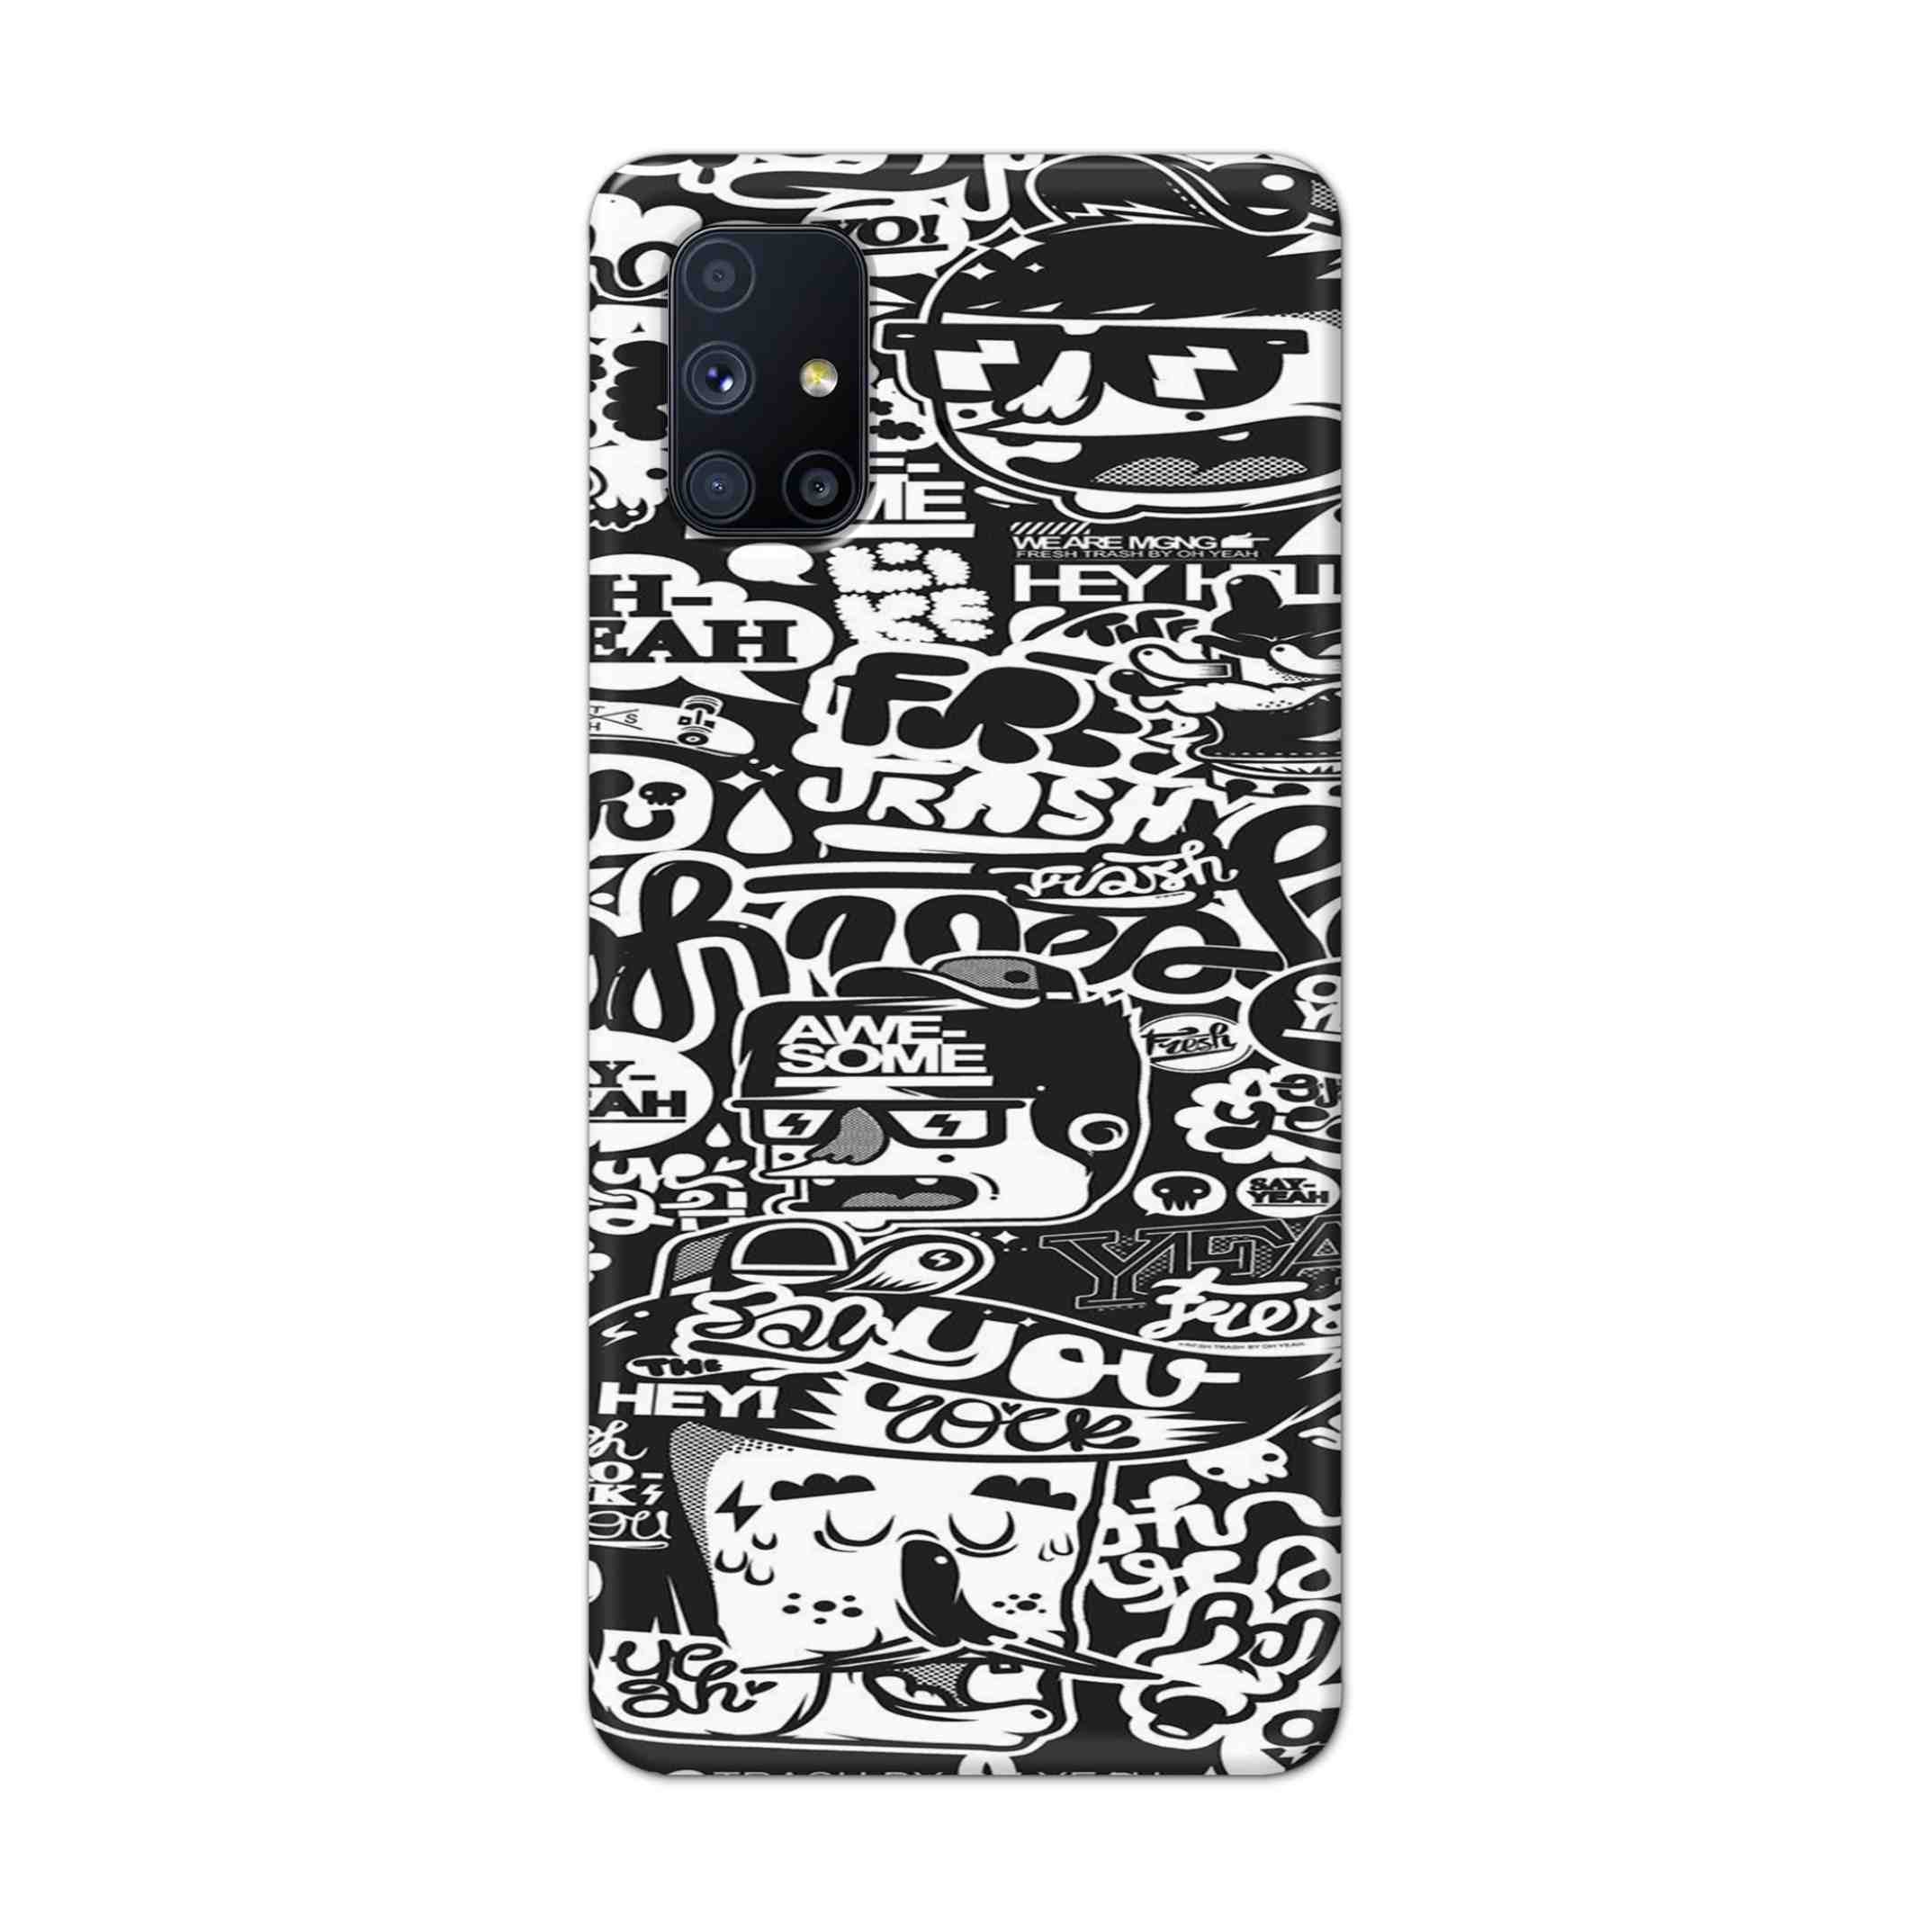 Buy Awesome Hard Back Mobile Phone Case Cover For Samsung Galaxy M51 Online